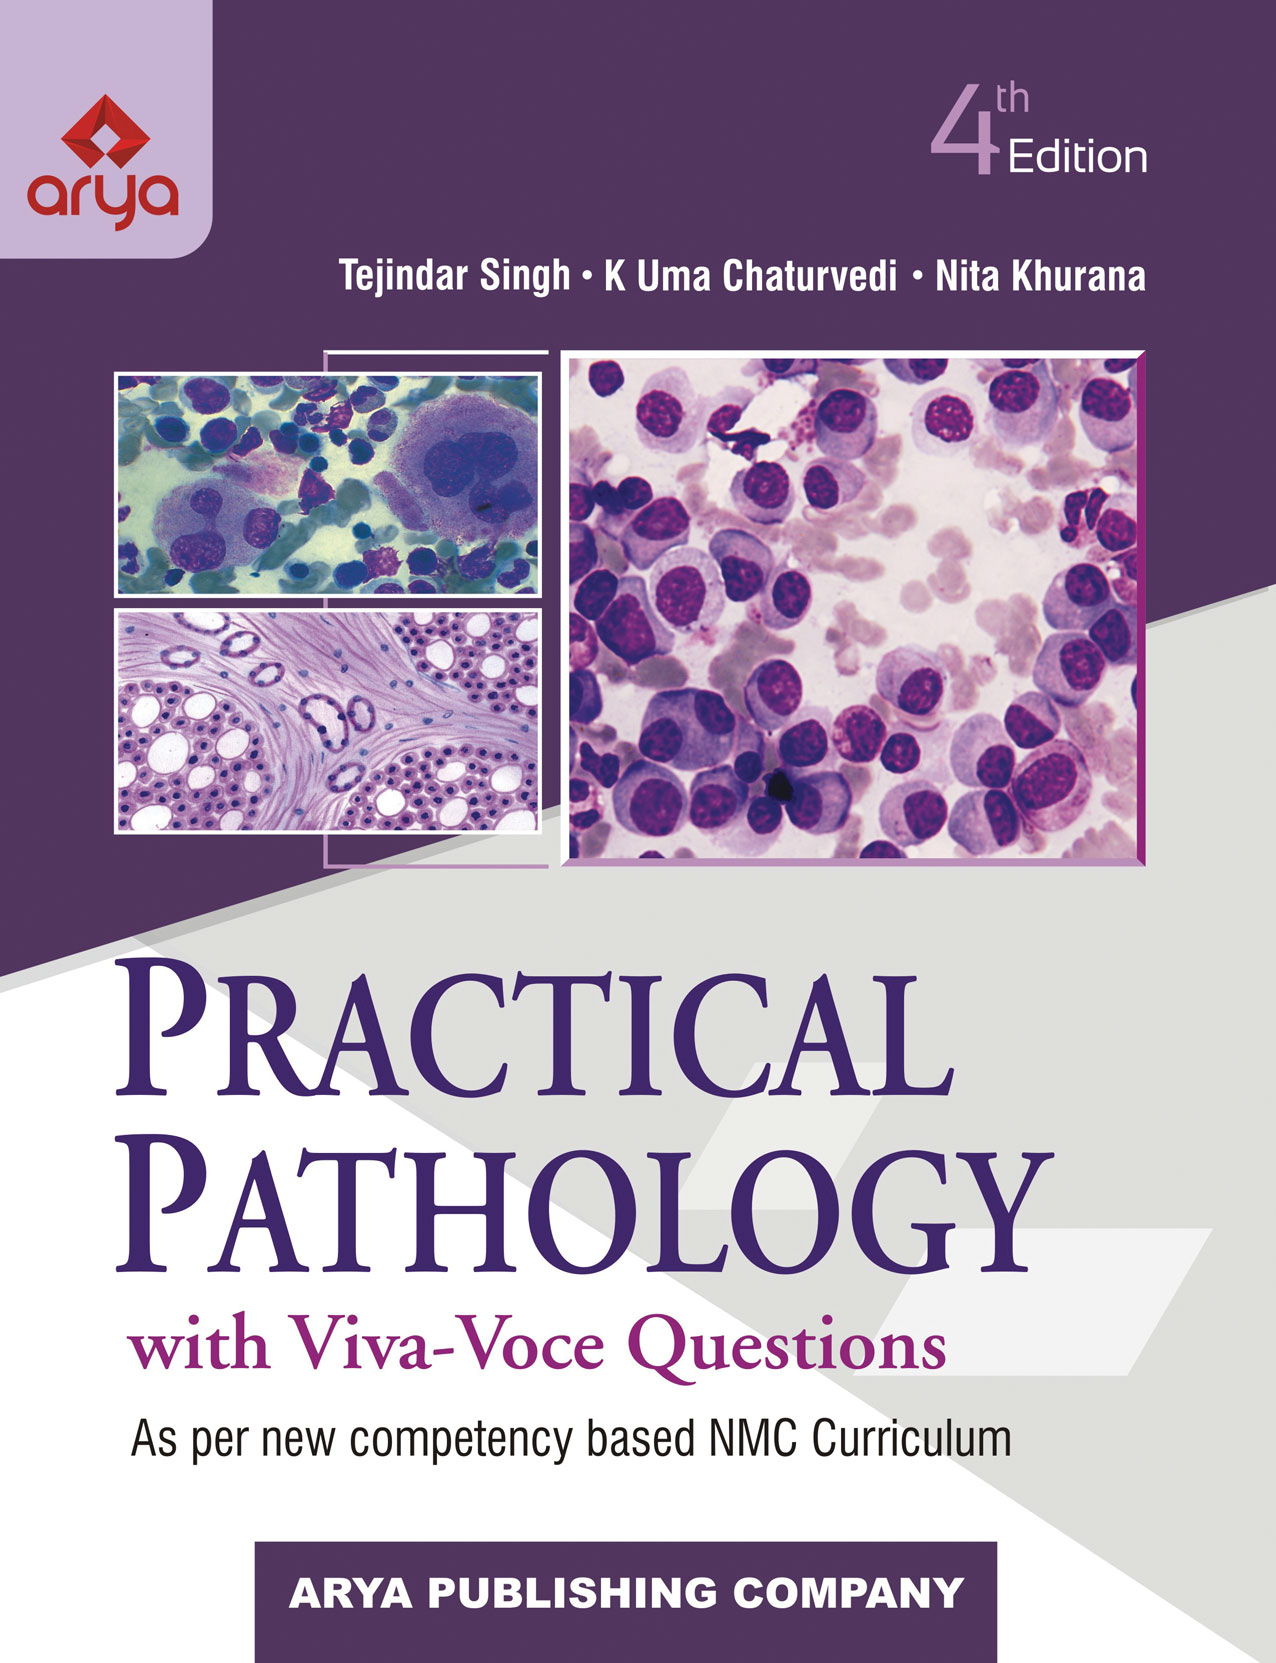 Practical Pathology (With Viva-Voce Questions)  (Fourth Edition)